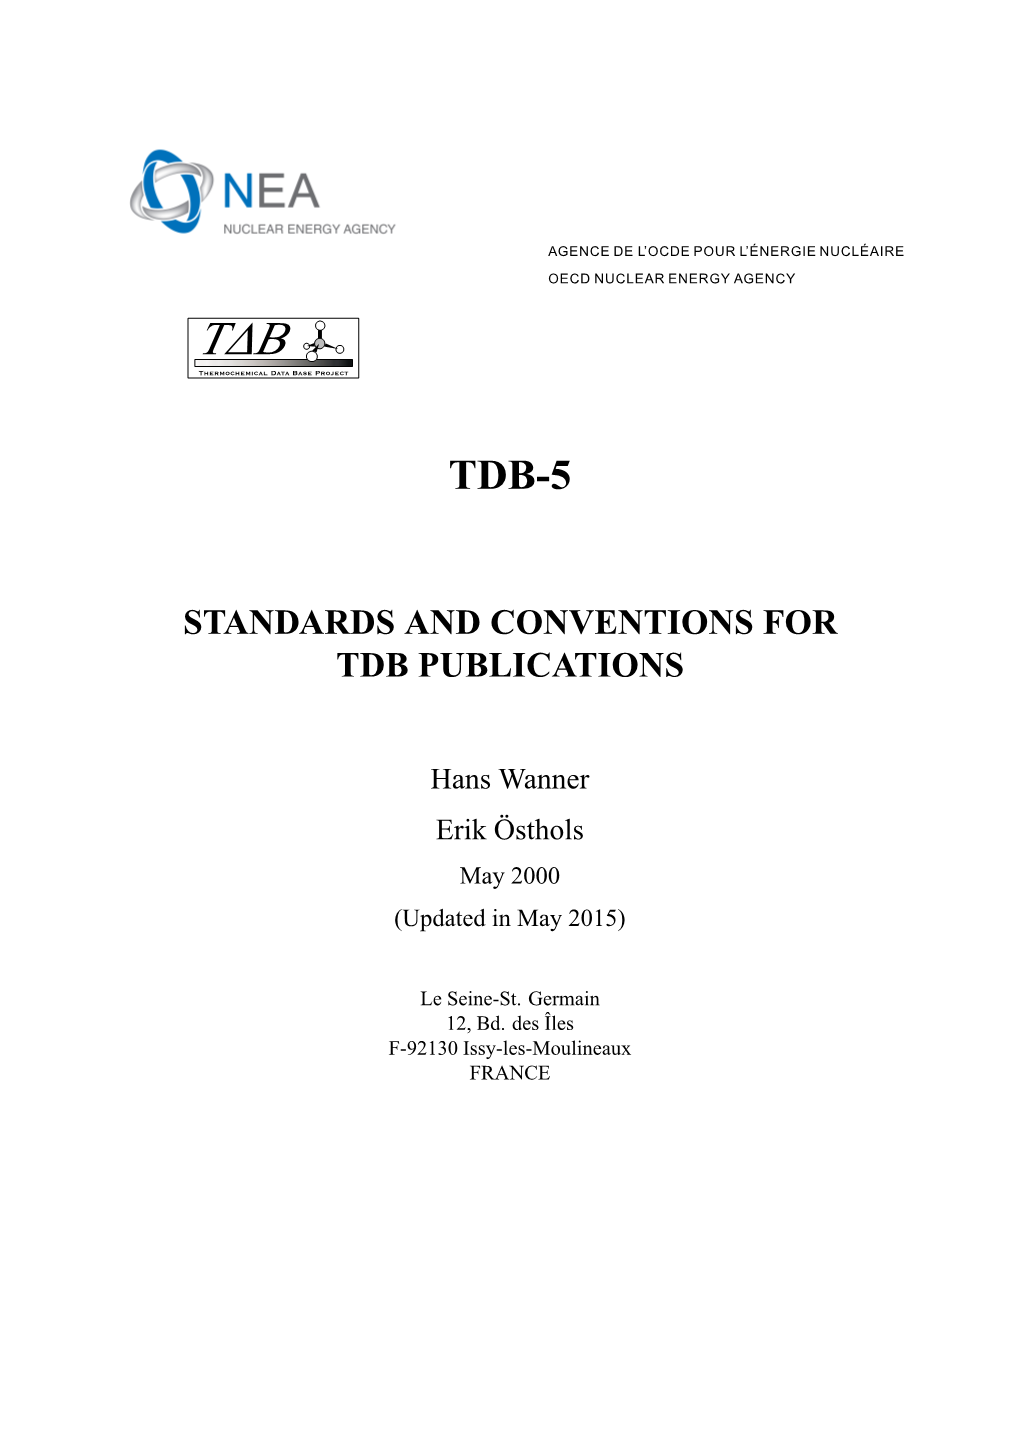 Standards and Conventions for Tdb Publications